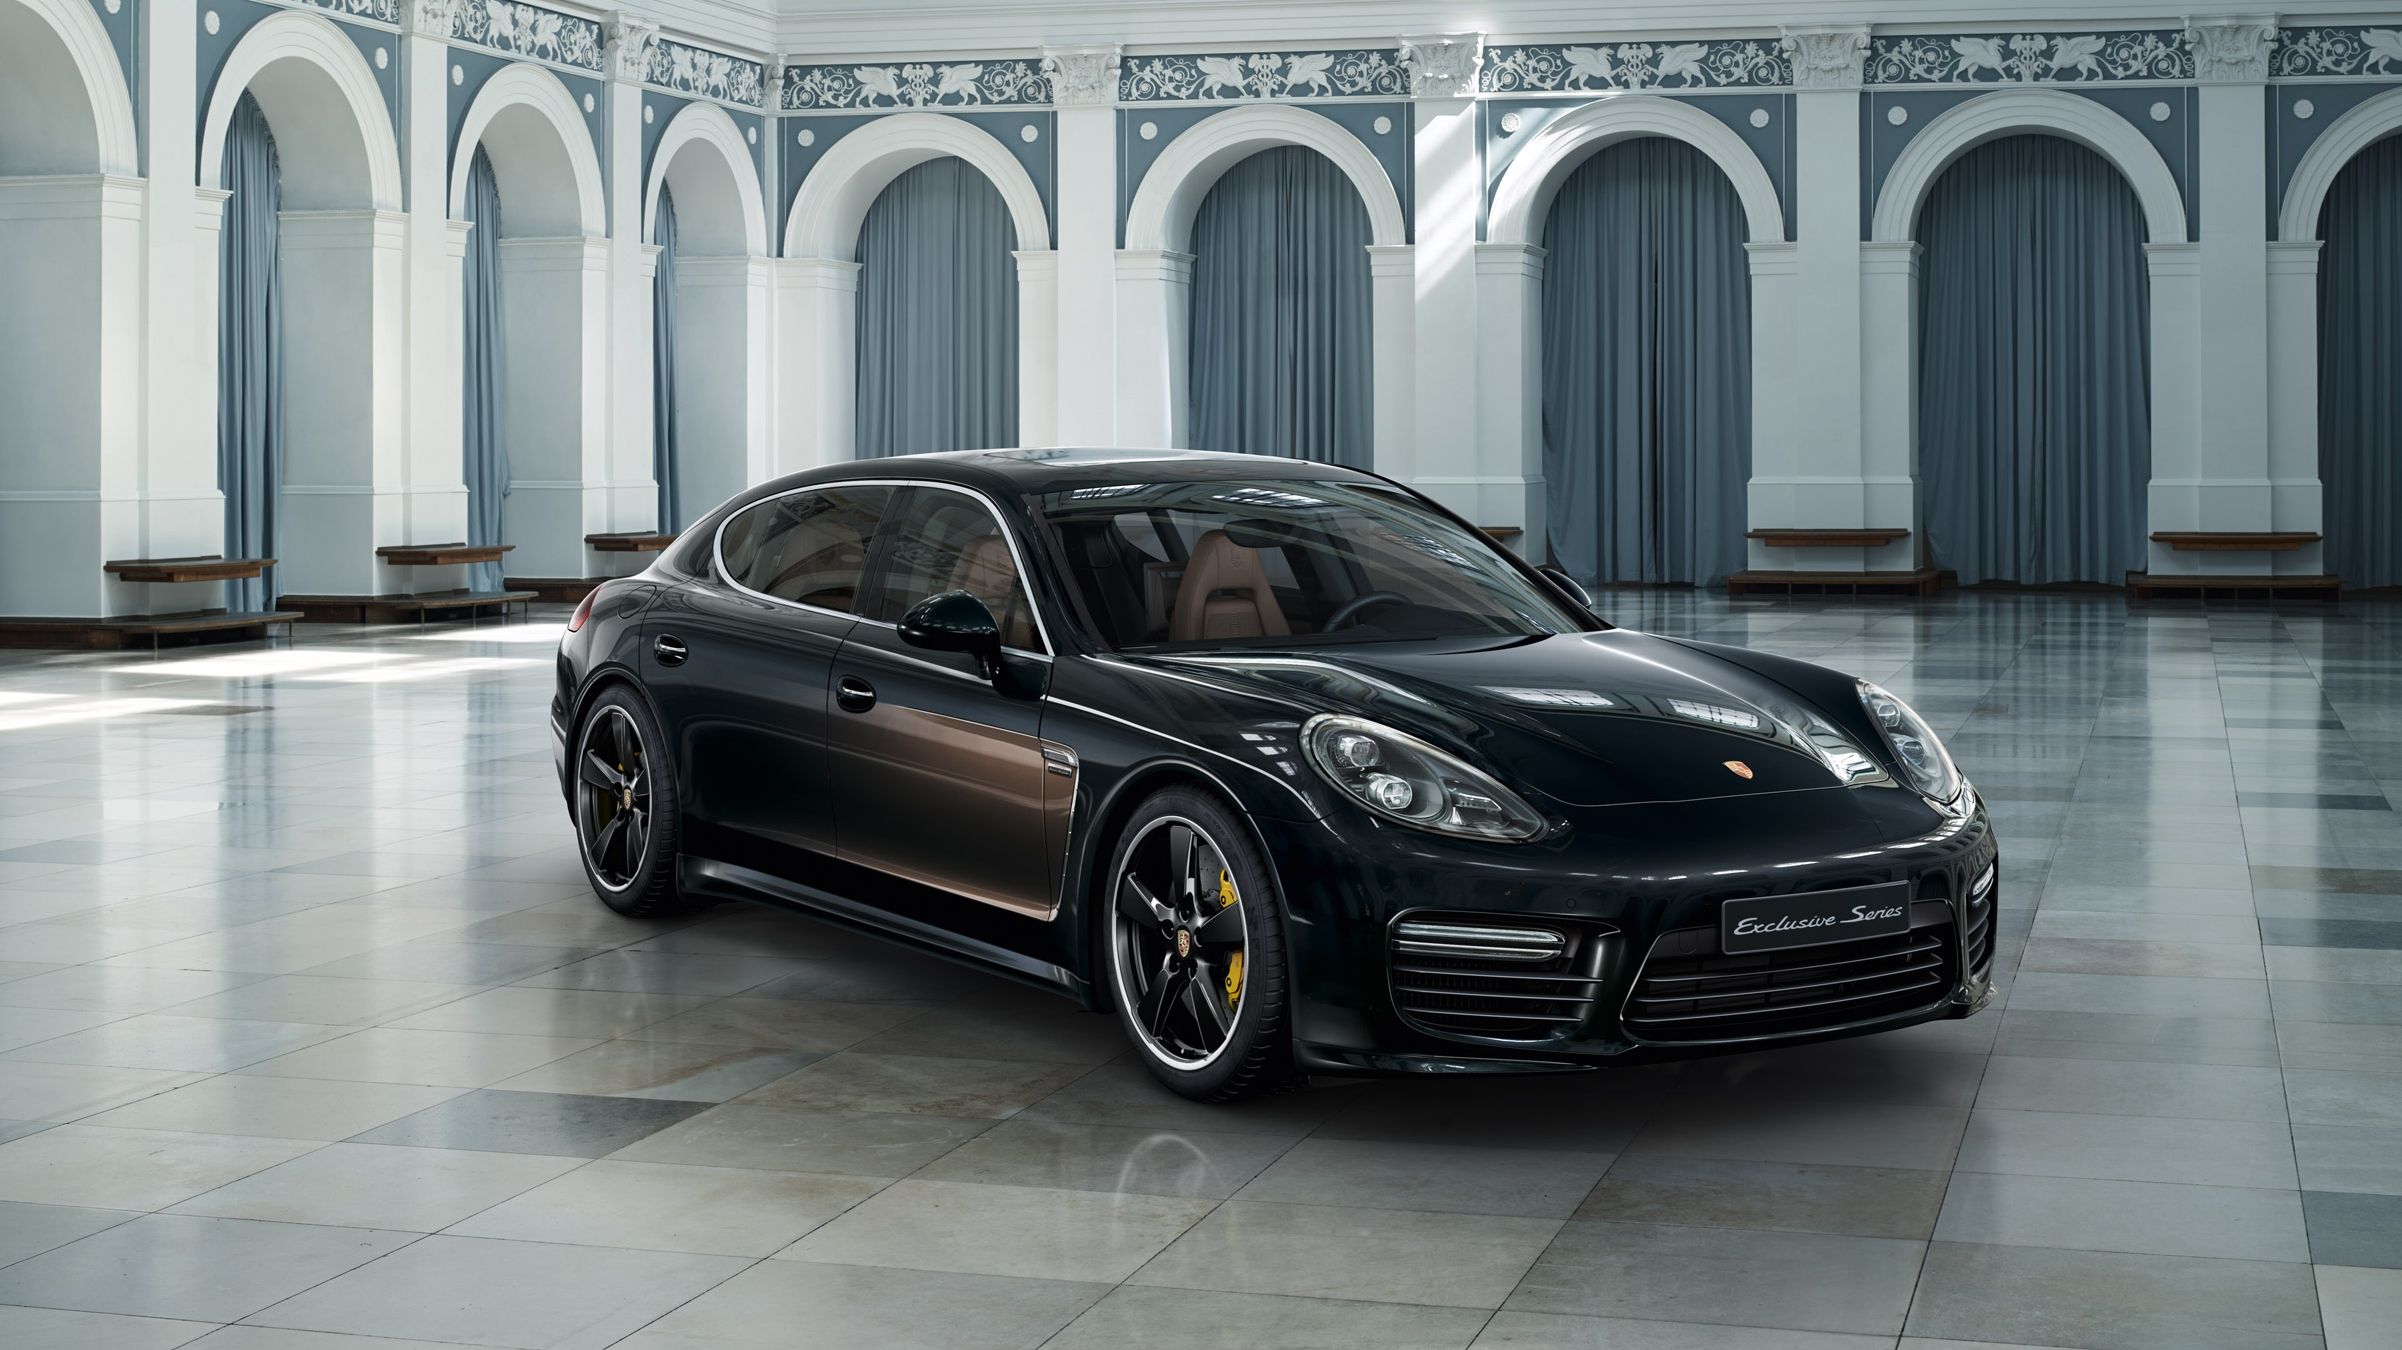  Porsche is introducing a new and exclusive Panamera Exclusive Series at the LA Auto Show. 